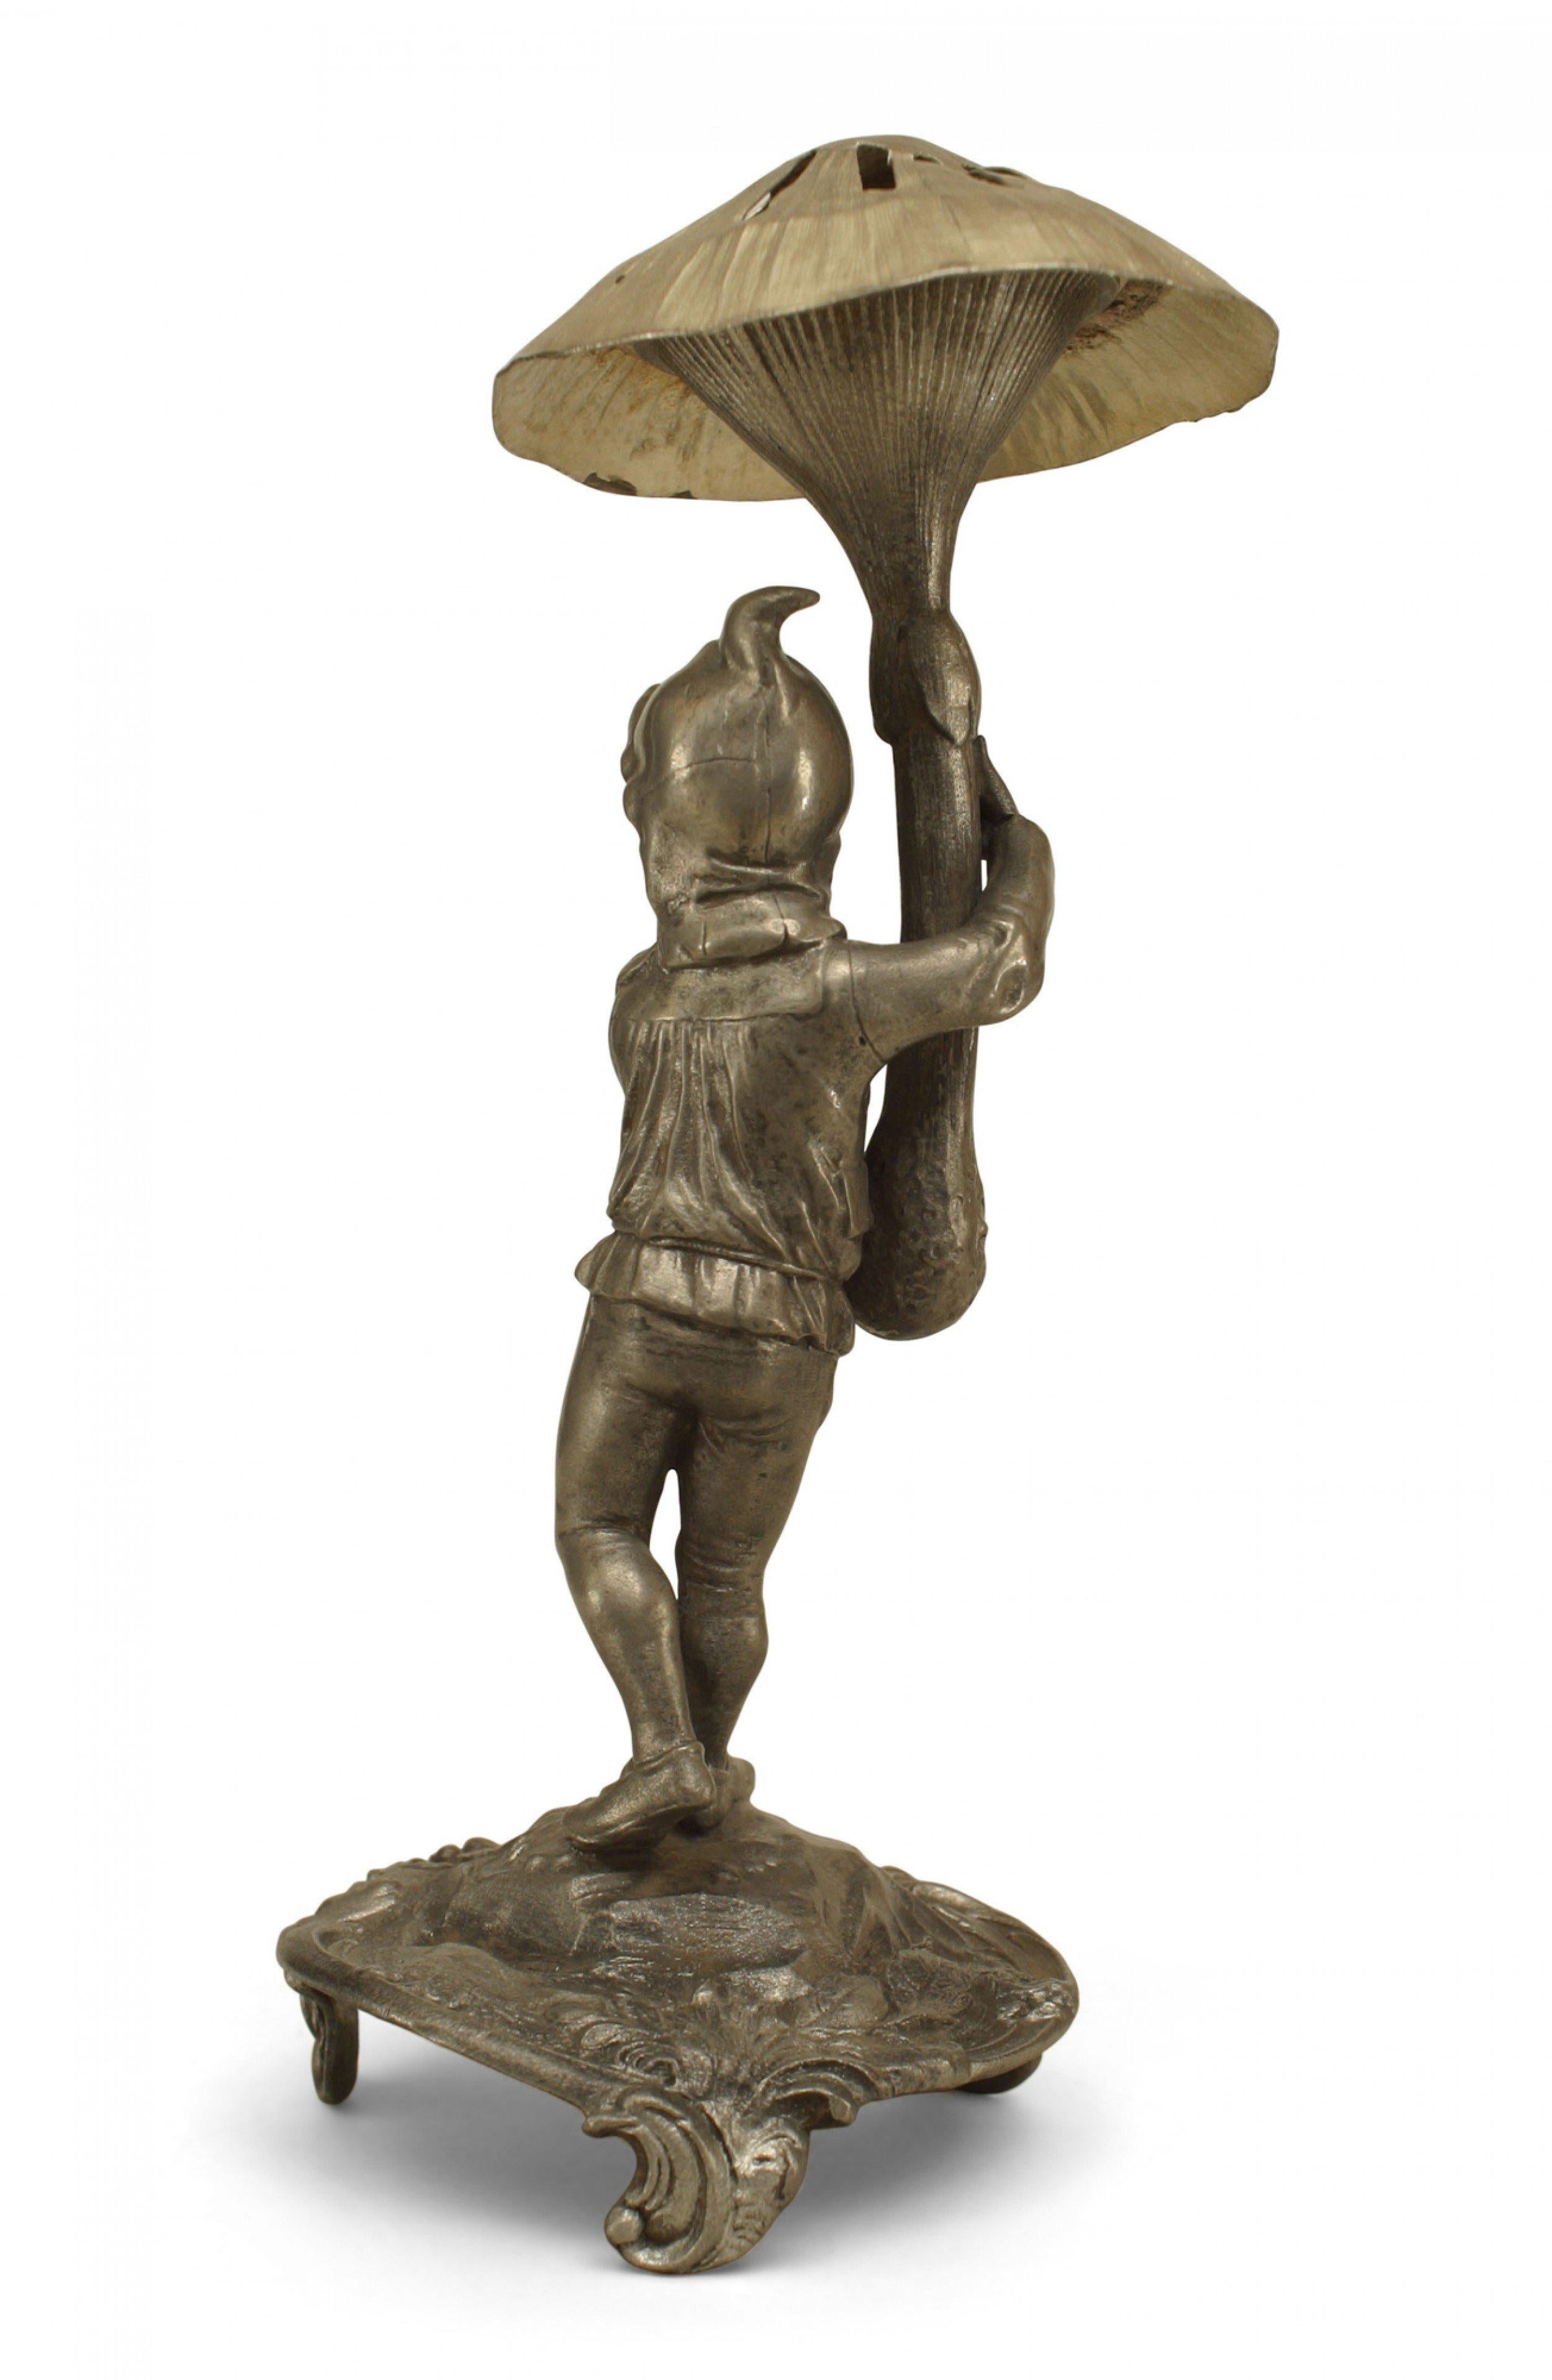 Continental German (19/20th cent) pewter small figure of a gnome holding a mushroom with a perferated top (toothpick holder) and standing on a stylized round base (WMF).
     